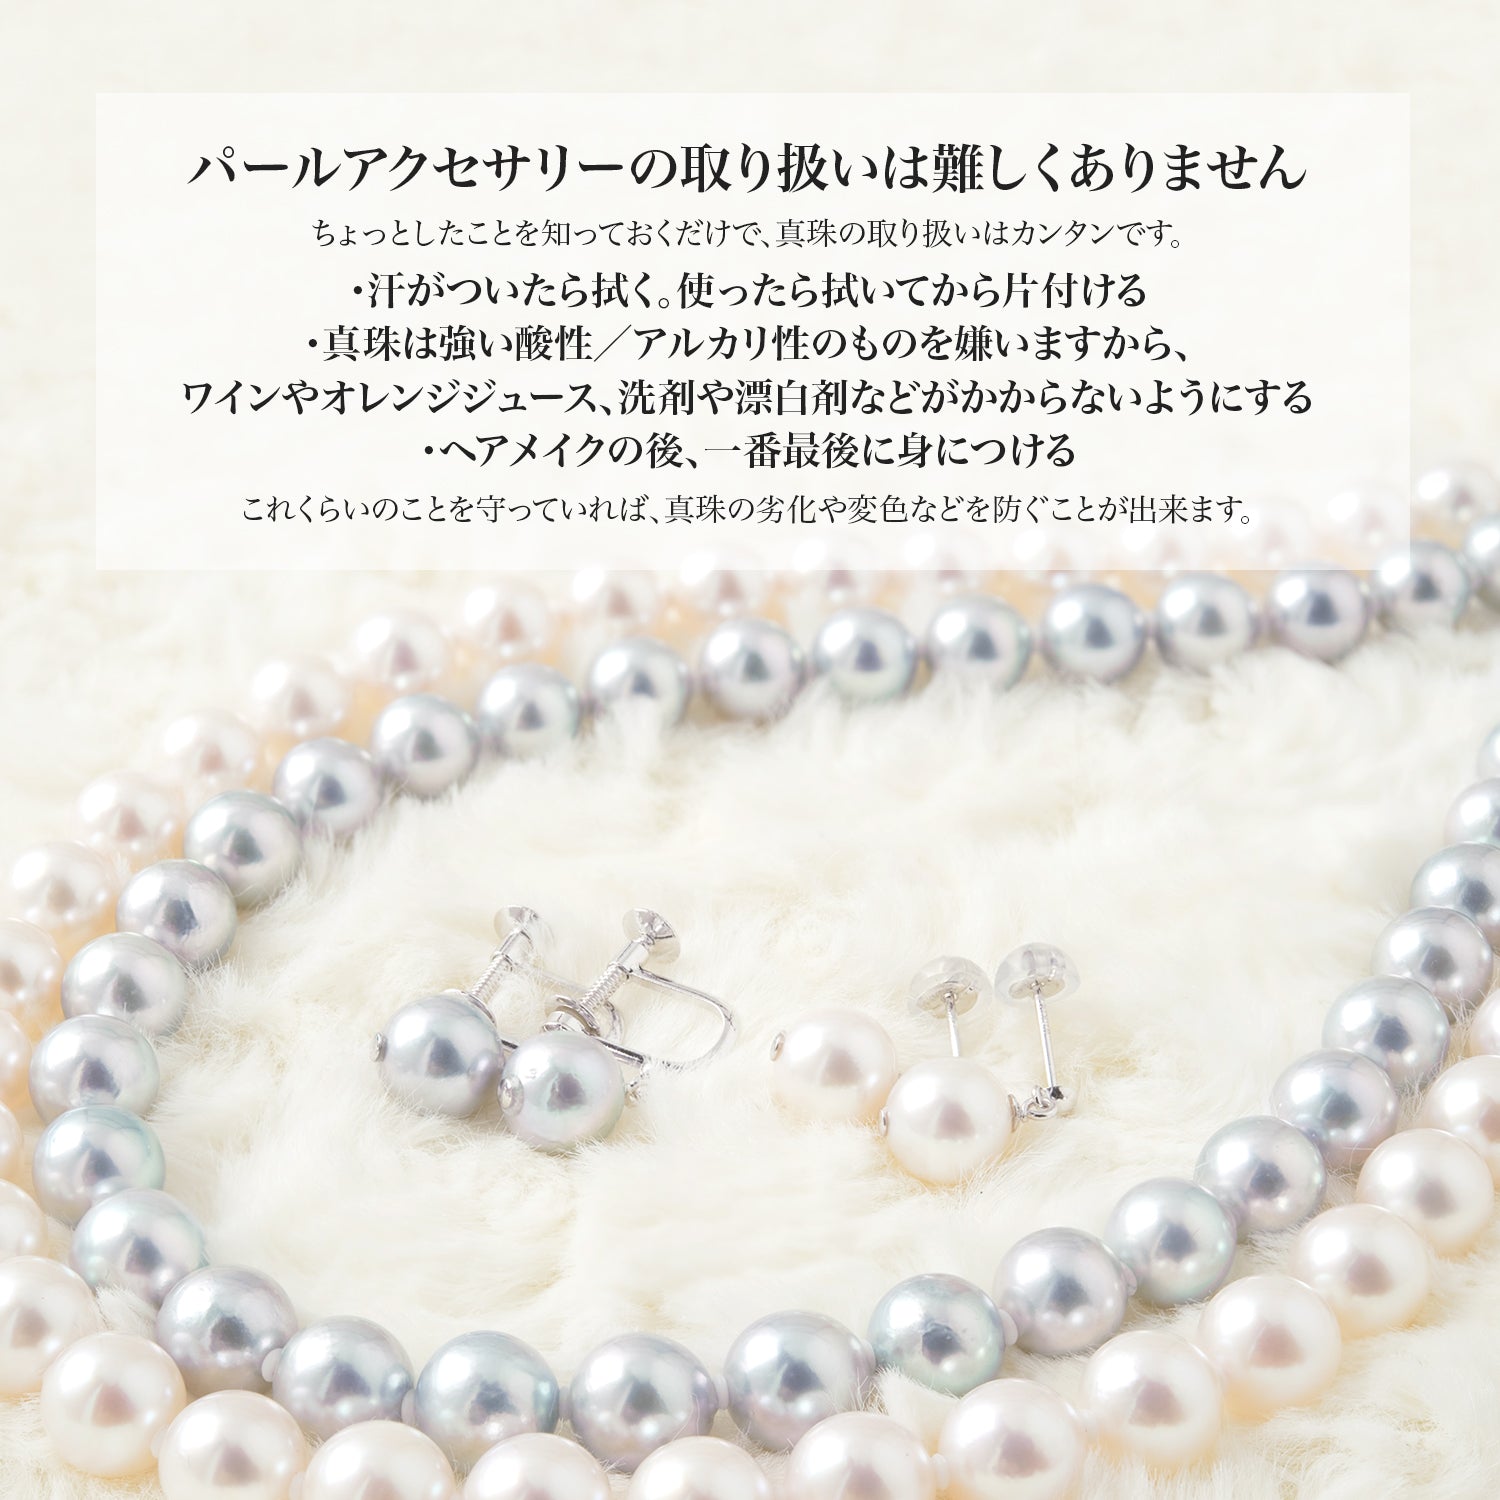 [Natural Blue] Uncolored Akoya Pearl Mantel Necklace [9.5-10.0mm] Stainless Steel Unisex Pearl Accessory (4156)